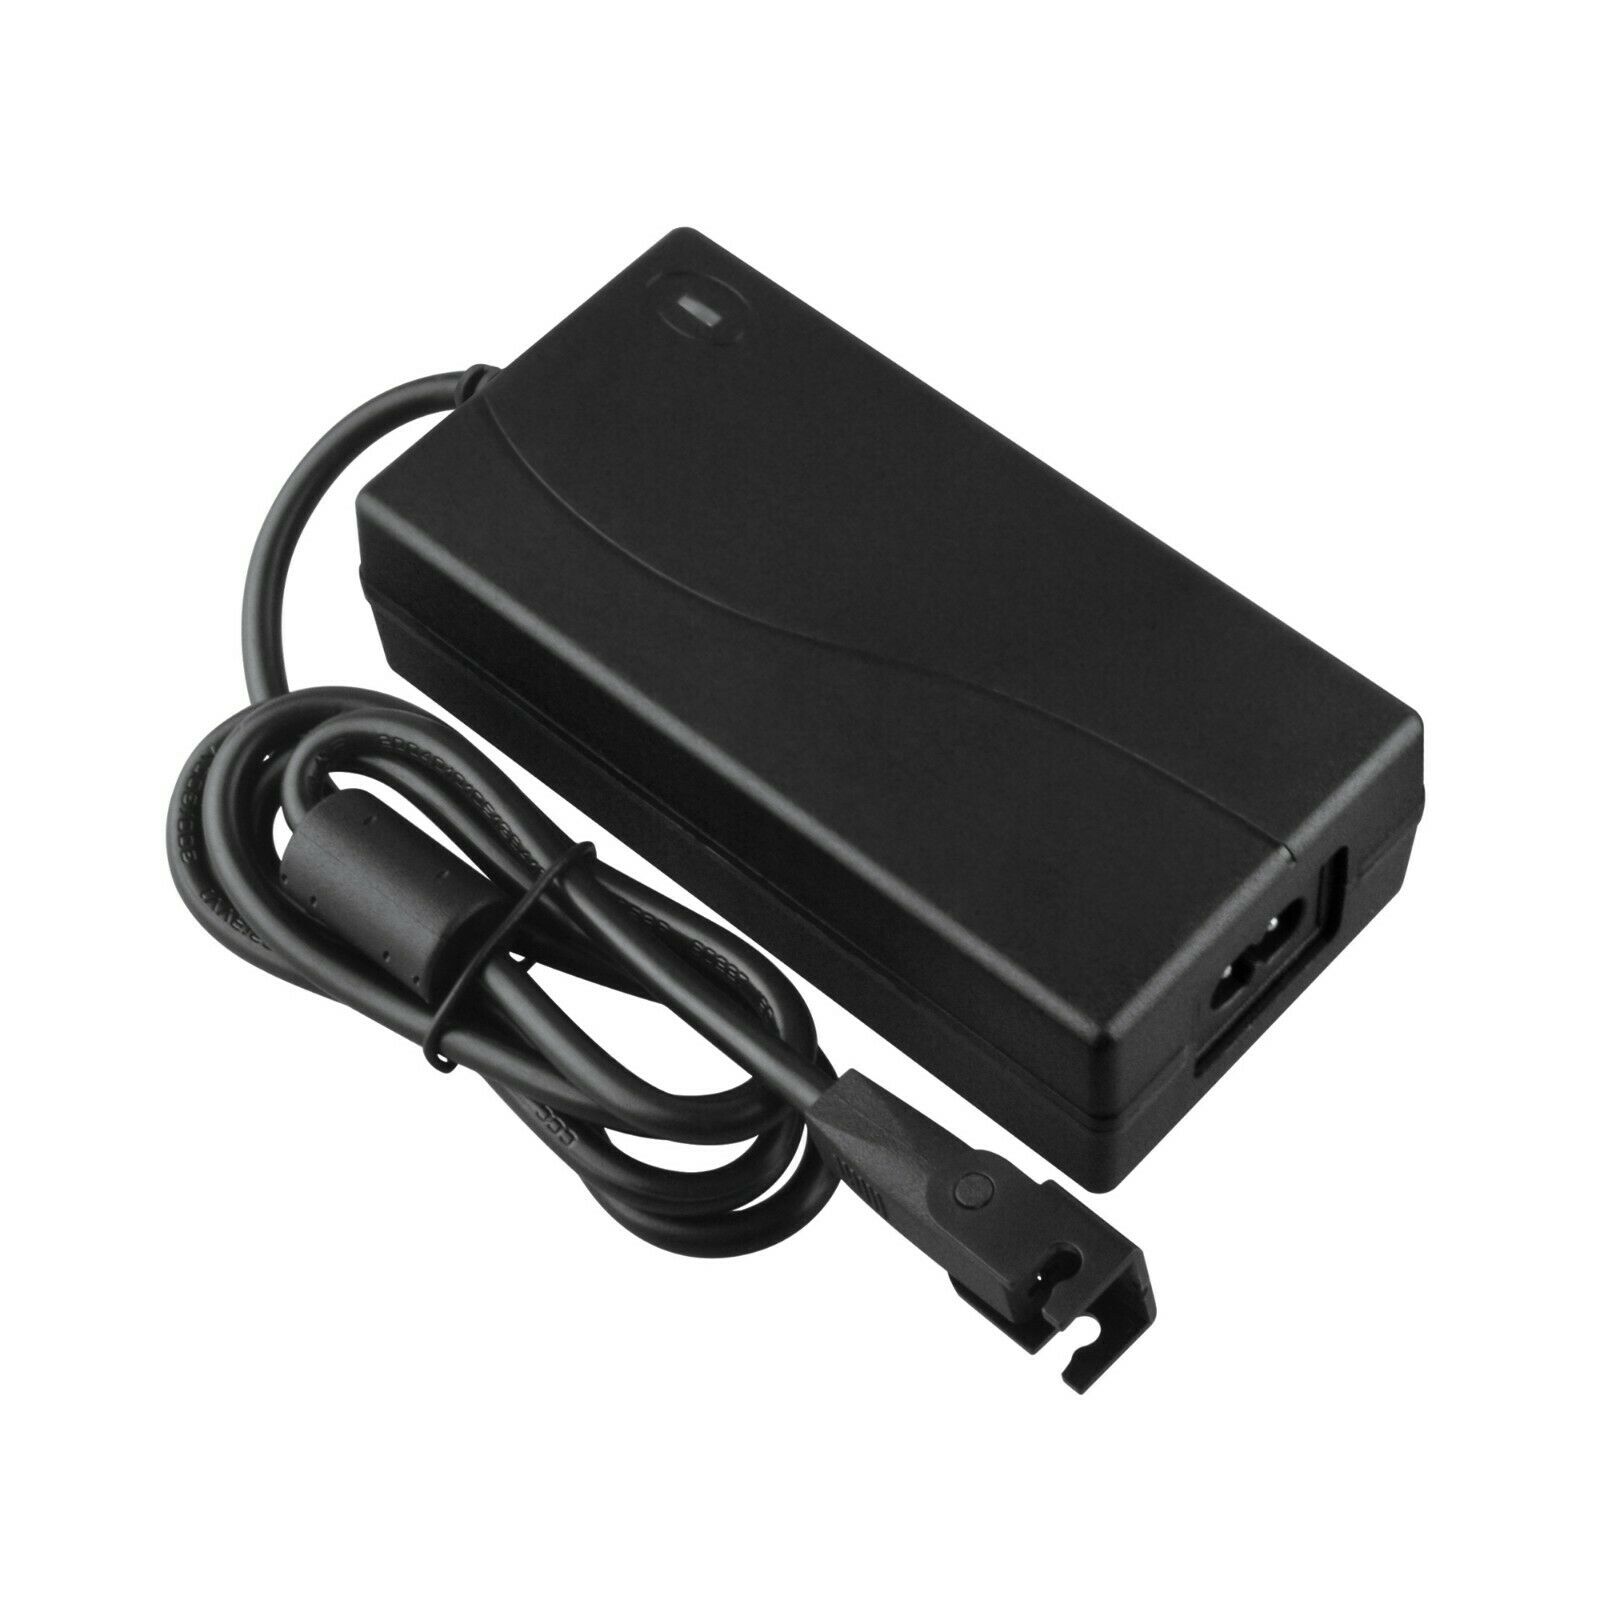 AC/DC Adapter For Yuneec E-GO Cruiser E-GO2 E-GO 2 Ego Battery Charger Power Technical Specifications: Input Voltage: AC